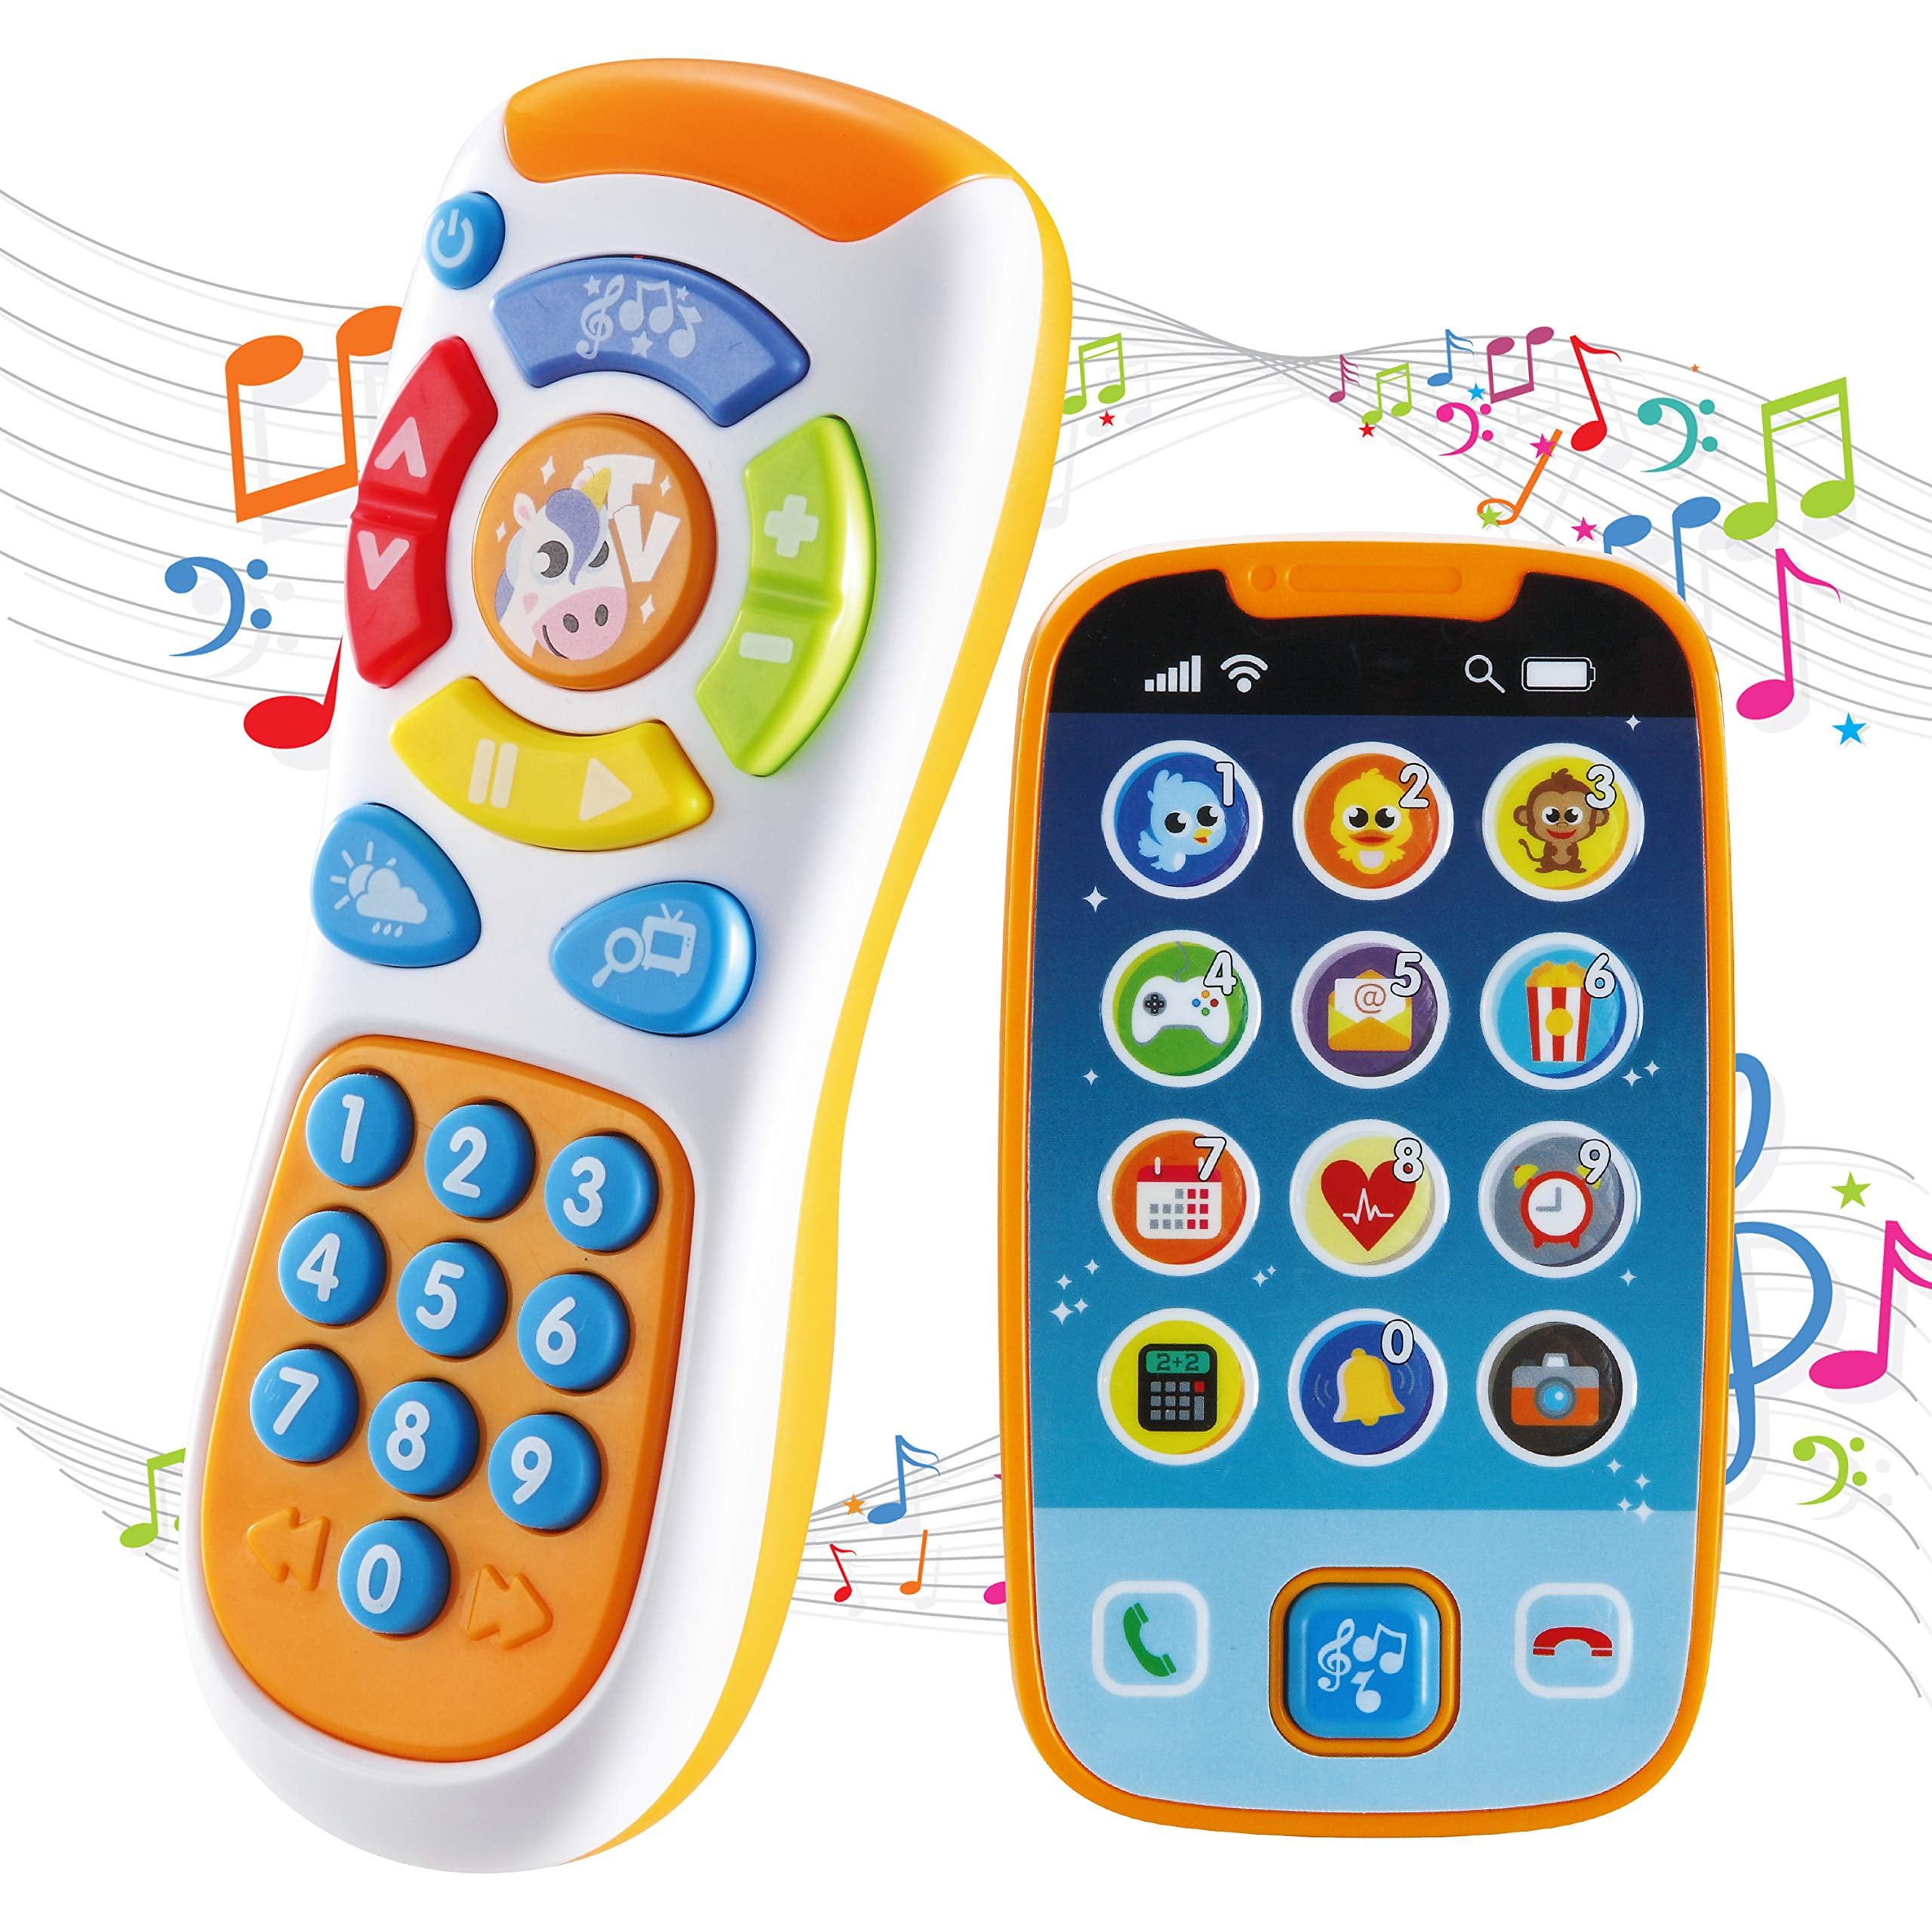 JOYIN My Learning Remote and Phone Bundle with Music, Fun Smartphone Toys  for Baby, Infants, Kids, Boys or Girls, Holiday Stocking Stuffers, Birthday